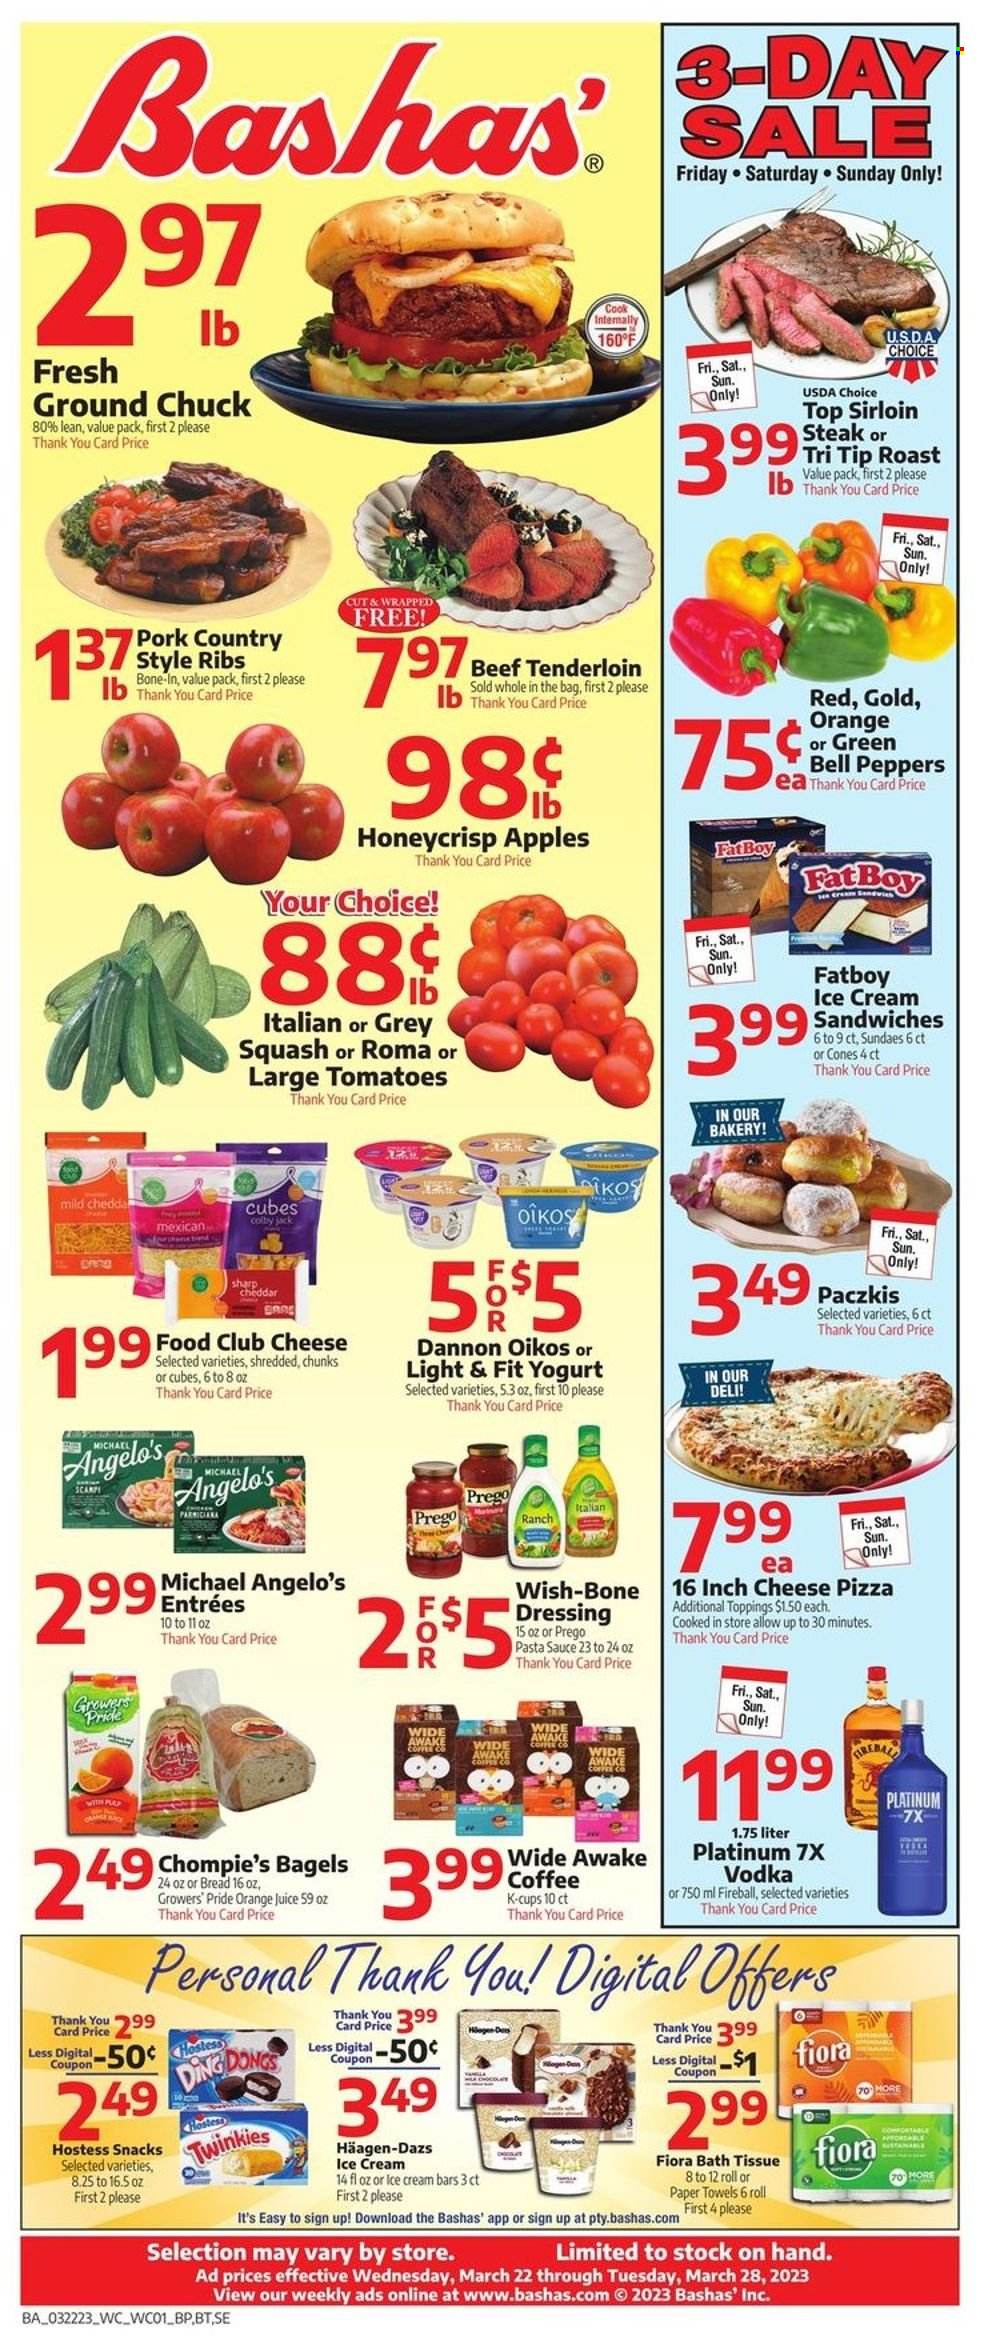 thumbnail - Bashas' Flyer - 03/22/2023 - 03/28/2023 - Sales products - bagels, bread, bell peppers, peppers, apples, pizza, pasta sauce, sauce, roast, Colby cheese, yoghurt, Oikos, Dannon, ice cream, ice cream bars, ice cream sandwich, Häagen-Dazs, snack, dressing, orange juice, juice, coffee capsules, K-Cups, vodka, beef meat, beef sirloin, ground chuck, steak, beef tenderloin, sirloin steak, ribs, pork ribs, country style ribs, bath tissue, kitchen towels, paper towels. Page 1.